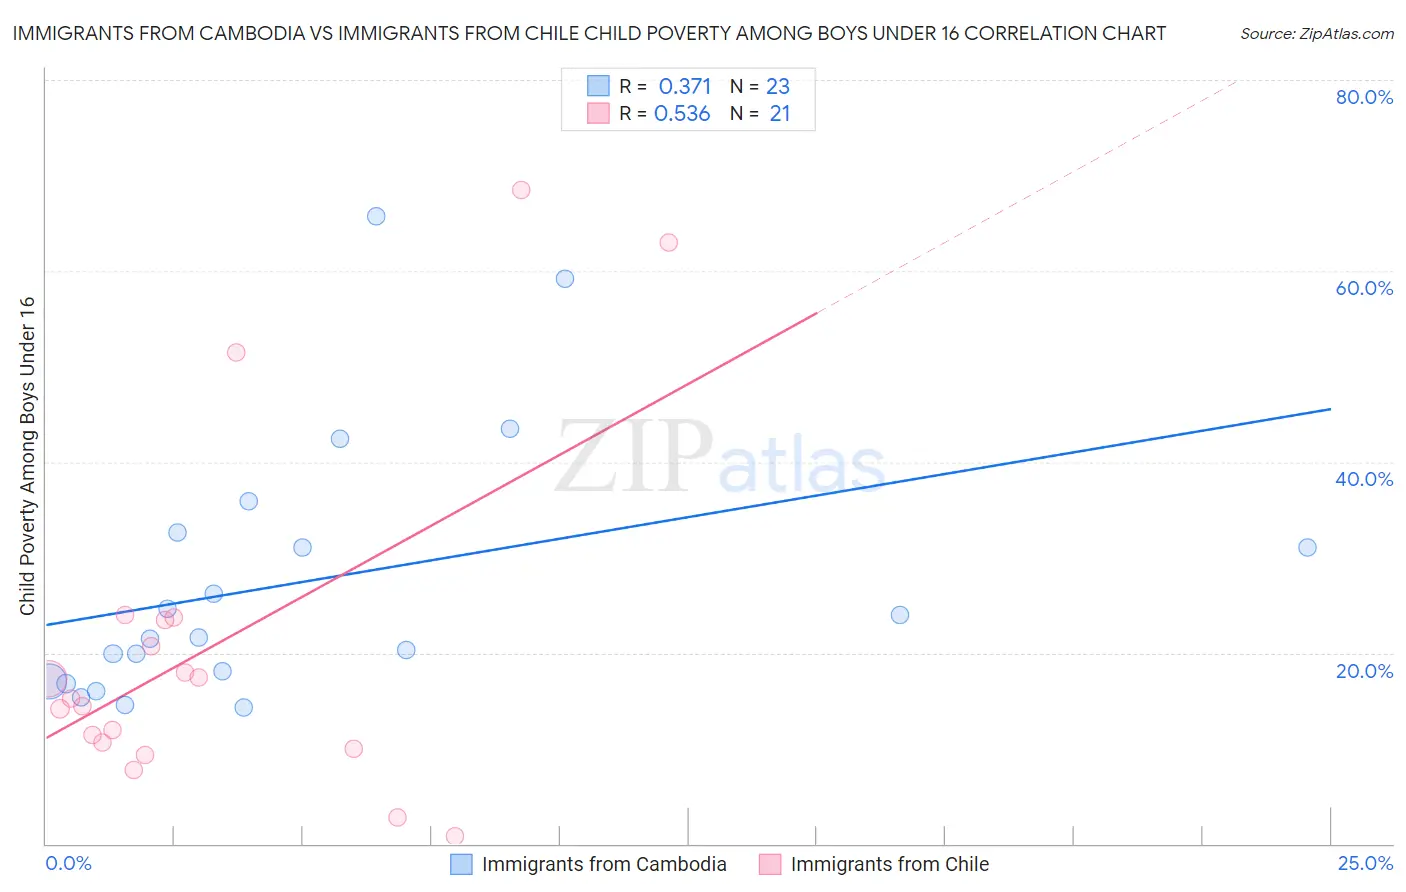 Immigrants from Cambodia vs Immigrants from Chile Child Poverty Among Boys Under 16